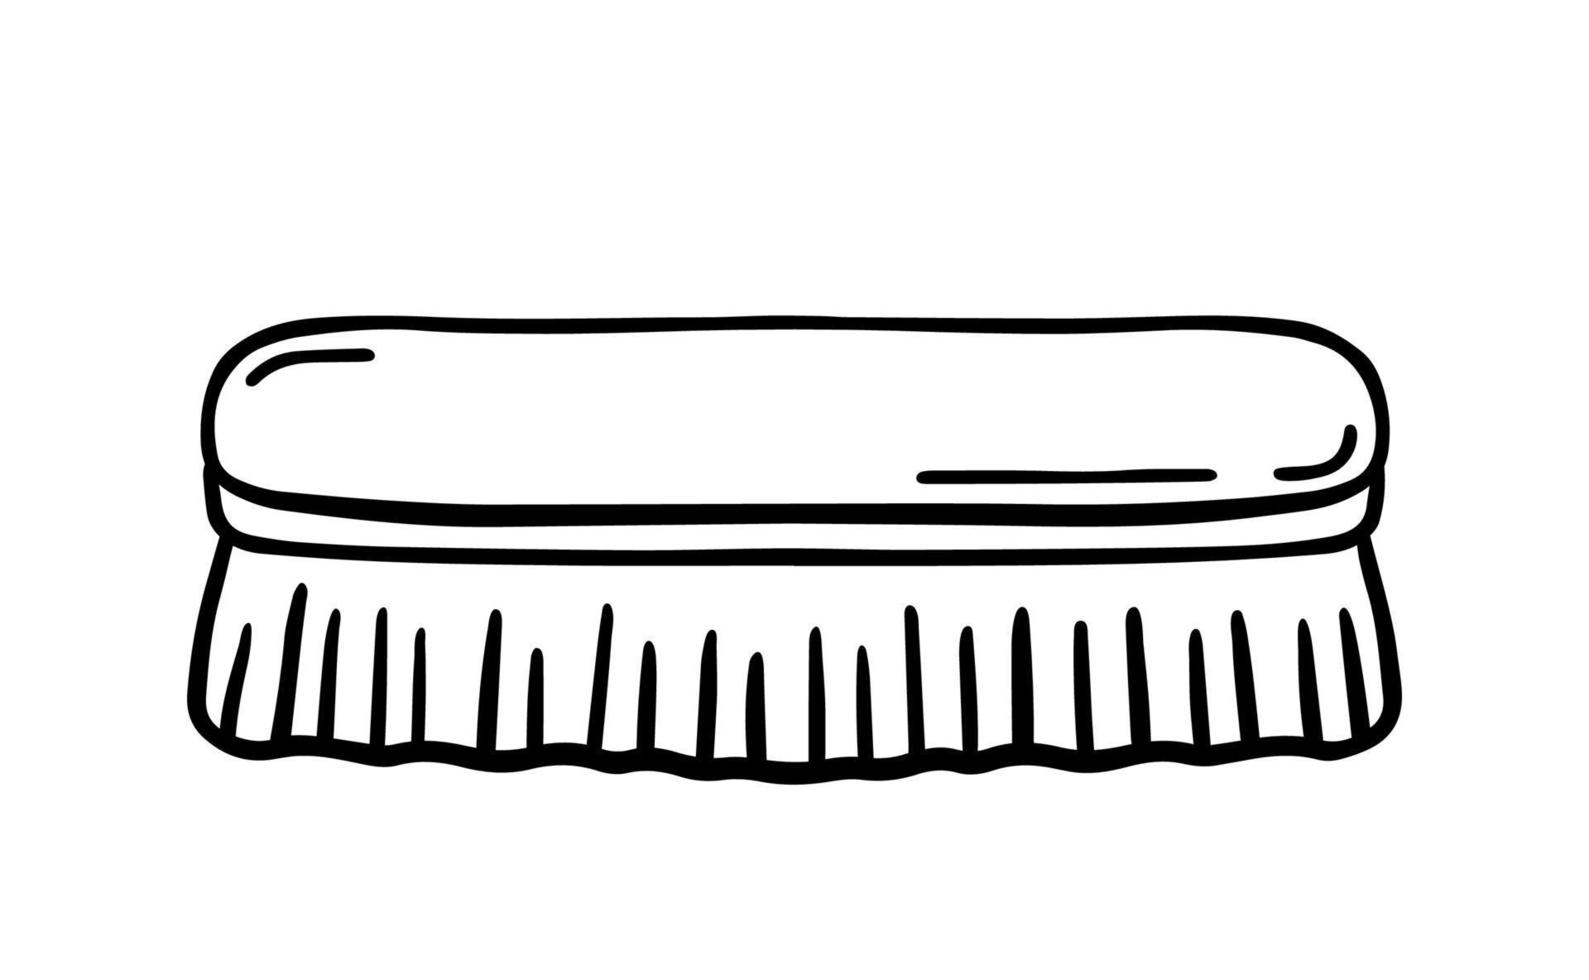 Wooden scrub brush for cleaning isolated on white background. Vector hand-drawn illustration in doodle style. Suitable for your projects, decorations, logo, various designs.